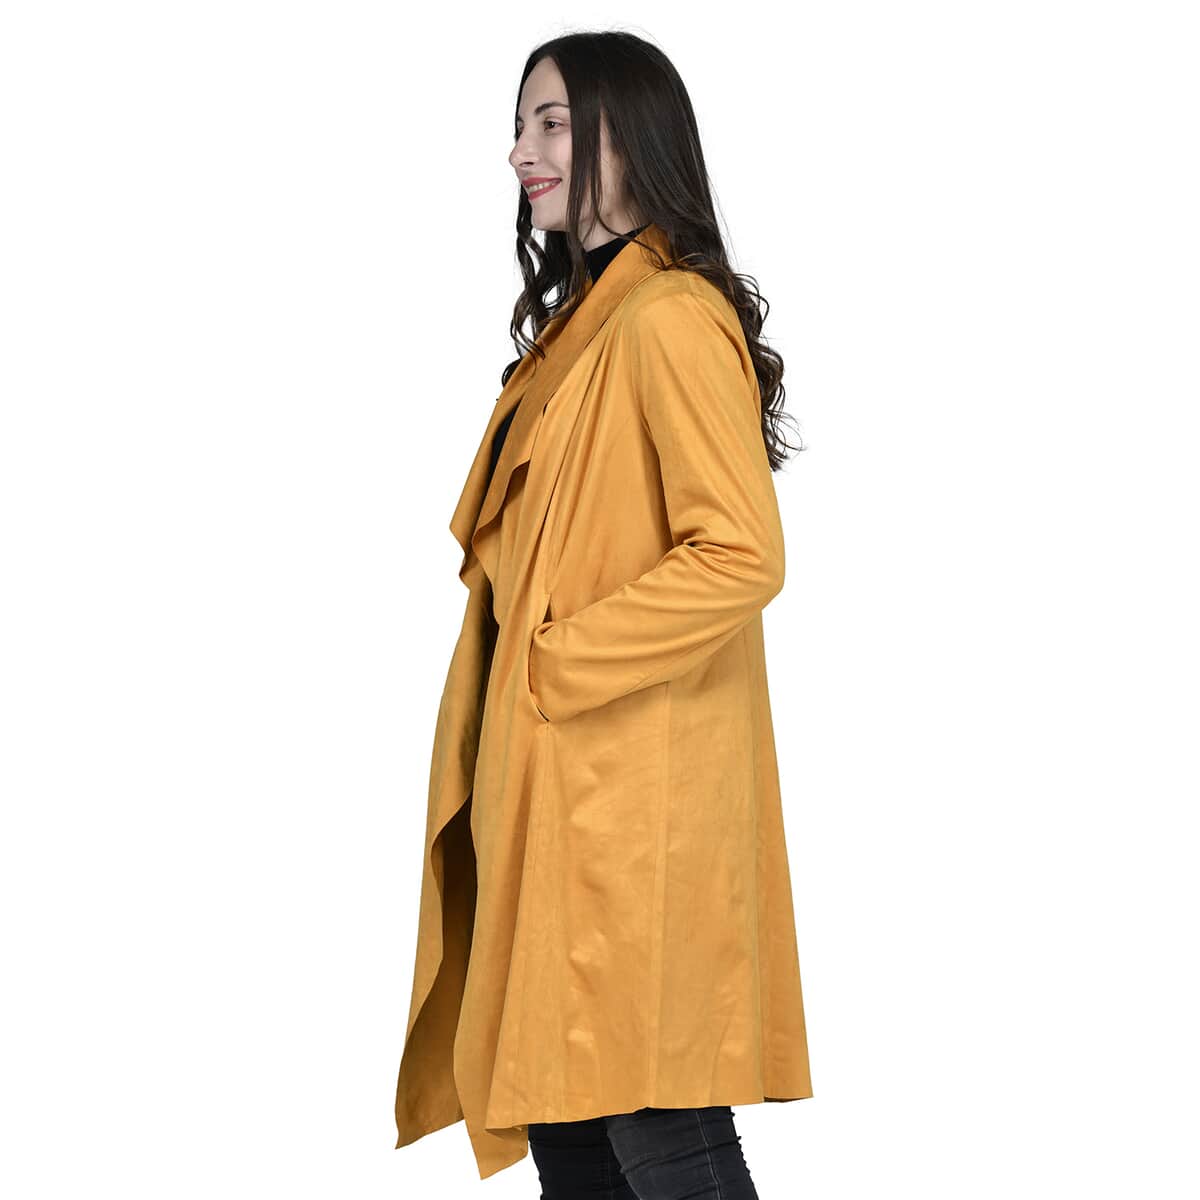 Passage Gold Faux Suede Long Waterfall Open Front Jacket For Ladies - XXL, Jacket for Women, Long Coat Jacket for Women, Womens Coats image number 2